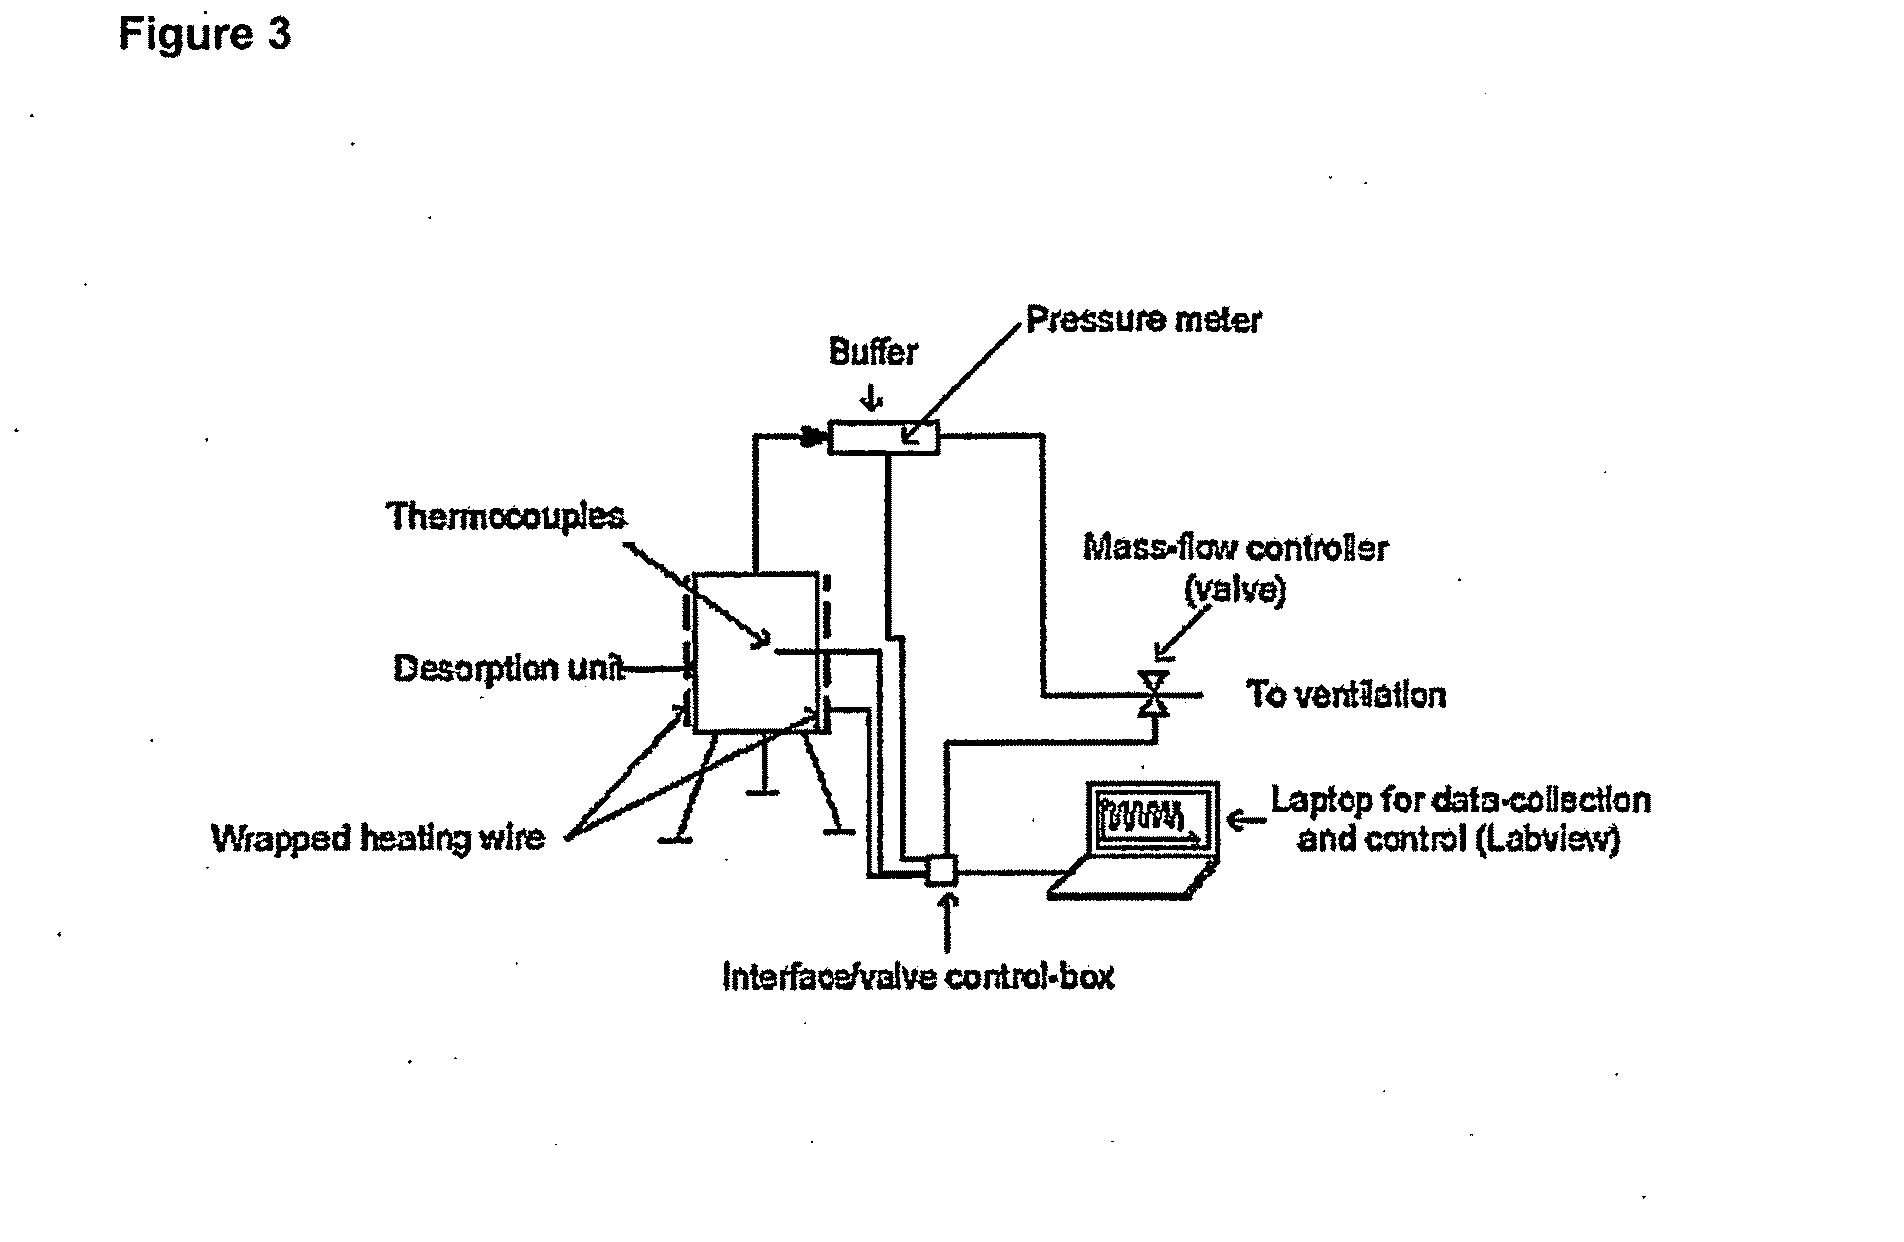 Solid ammonia storage and delivery material